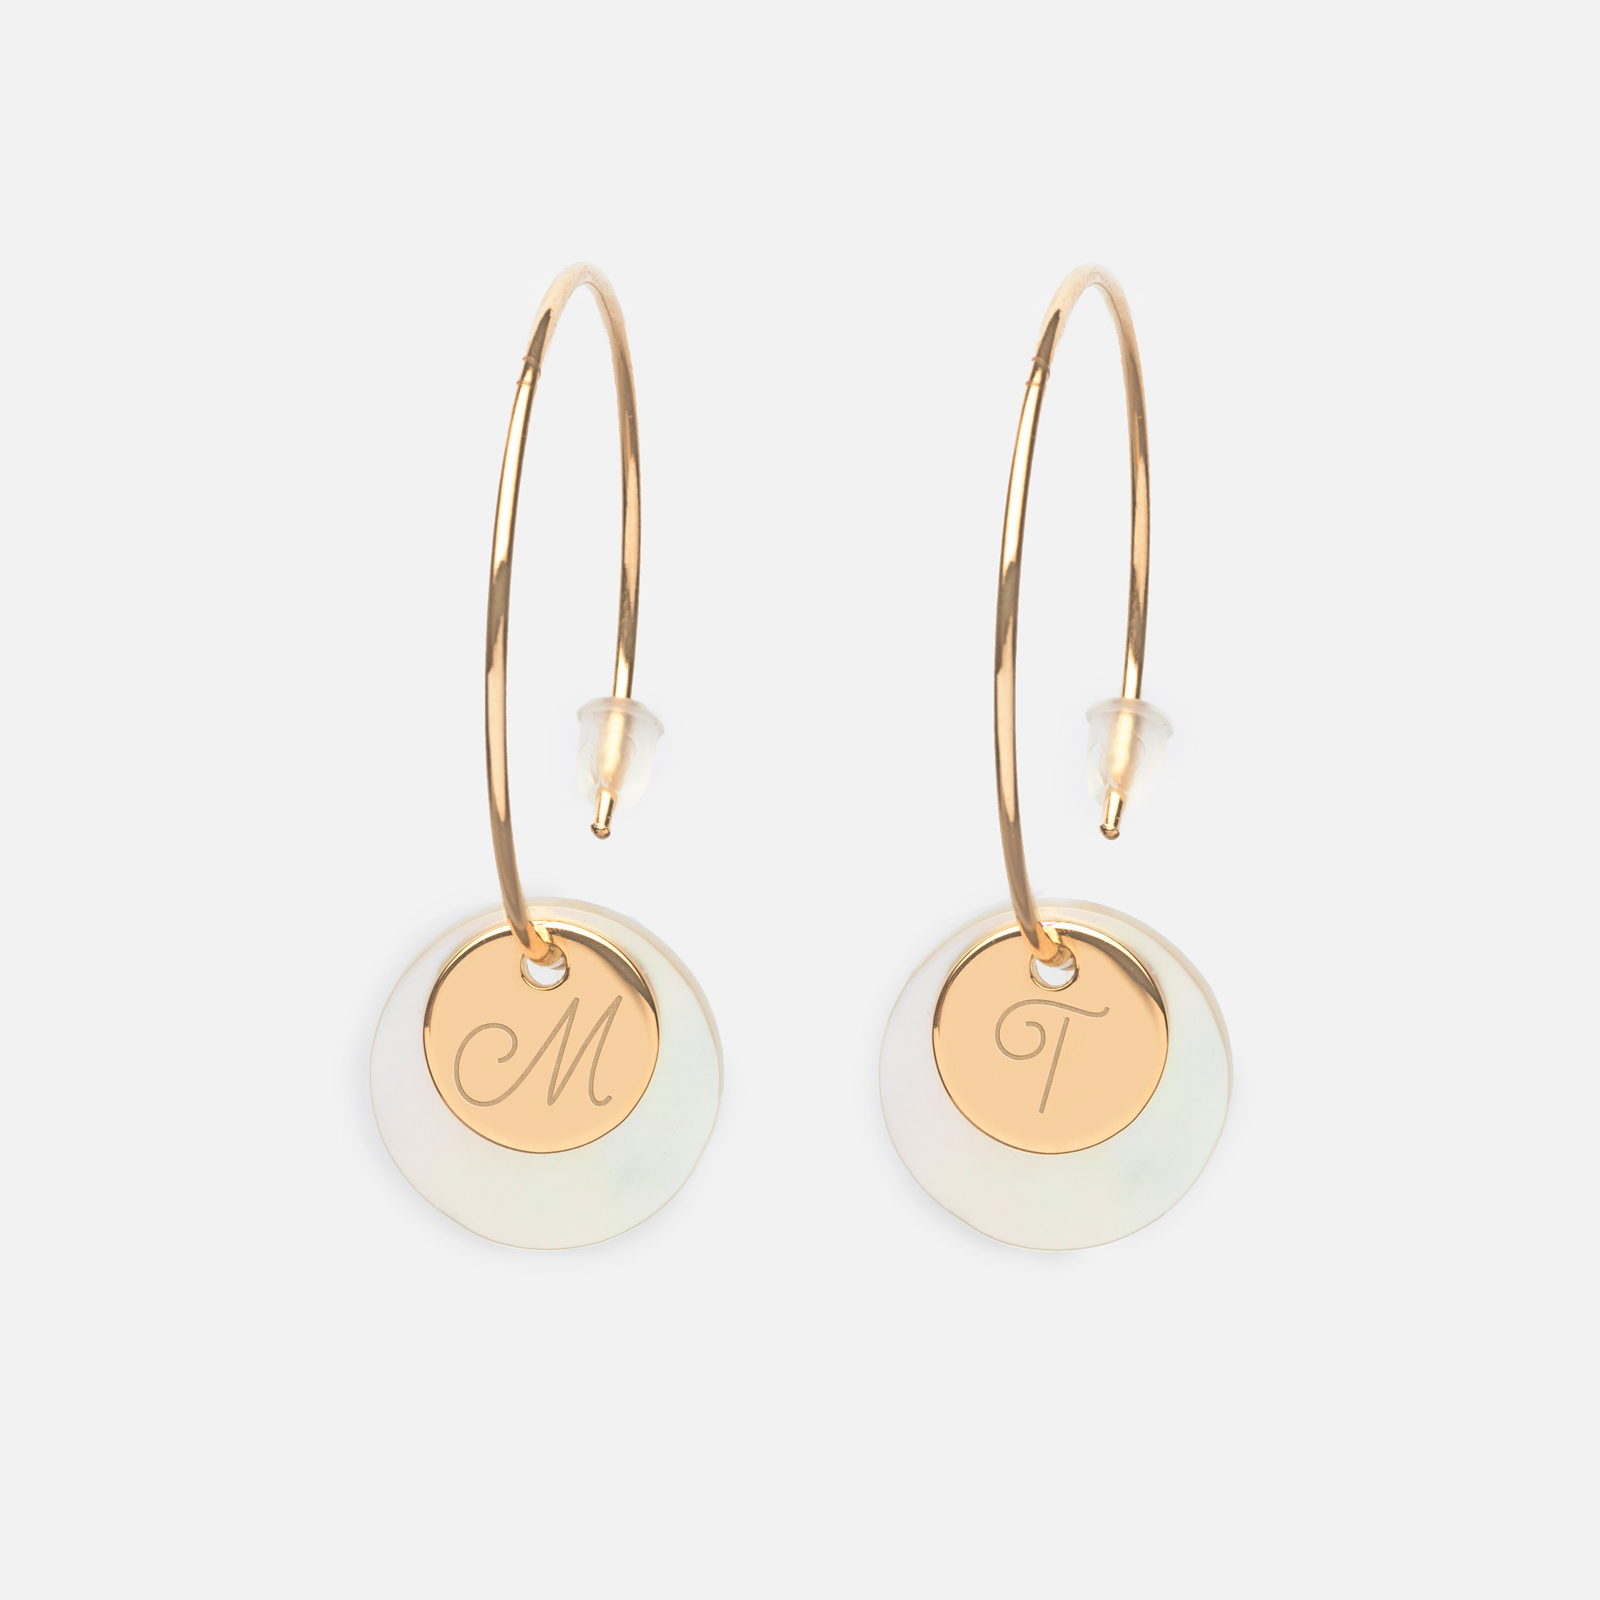 Creole earrings personnalised with 10 mm gold-plated engraved medallion initial 10 mm and 15 mm mother-of-pearl charm